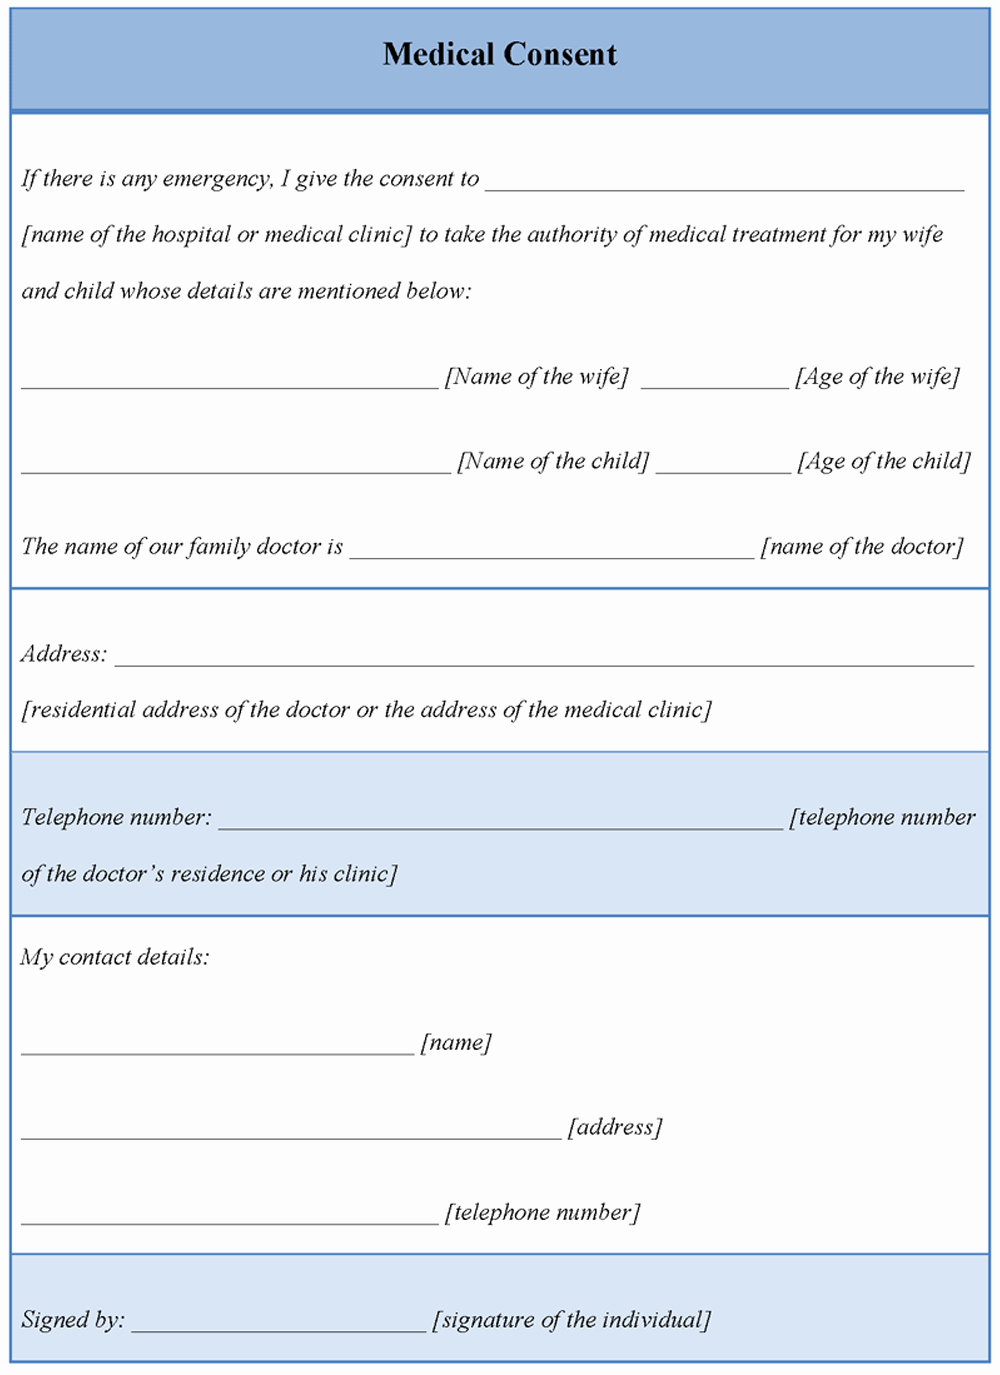 Medical Consent form Template Awesome Medical Template for Consent form Example Of Medical